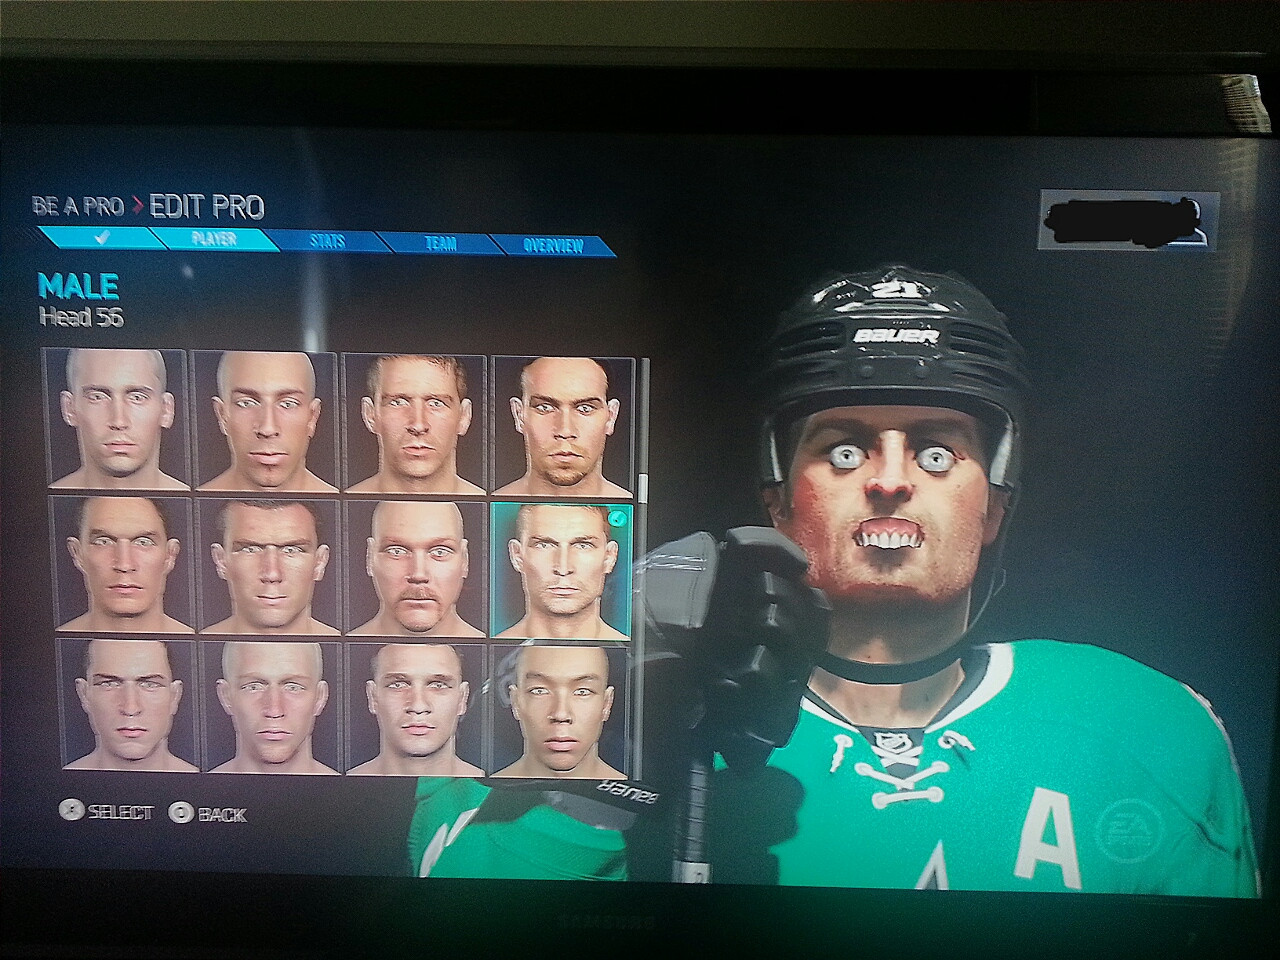 nhl glitches - Be A Pro Edit Pro Team Overview Male Head 56 Select Back